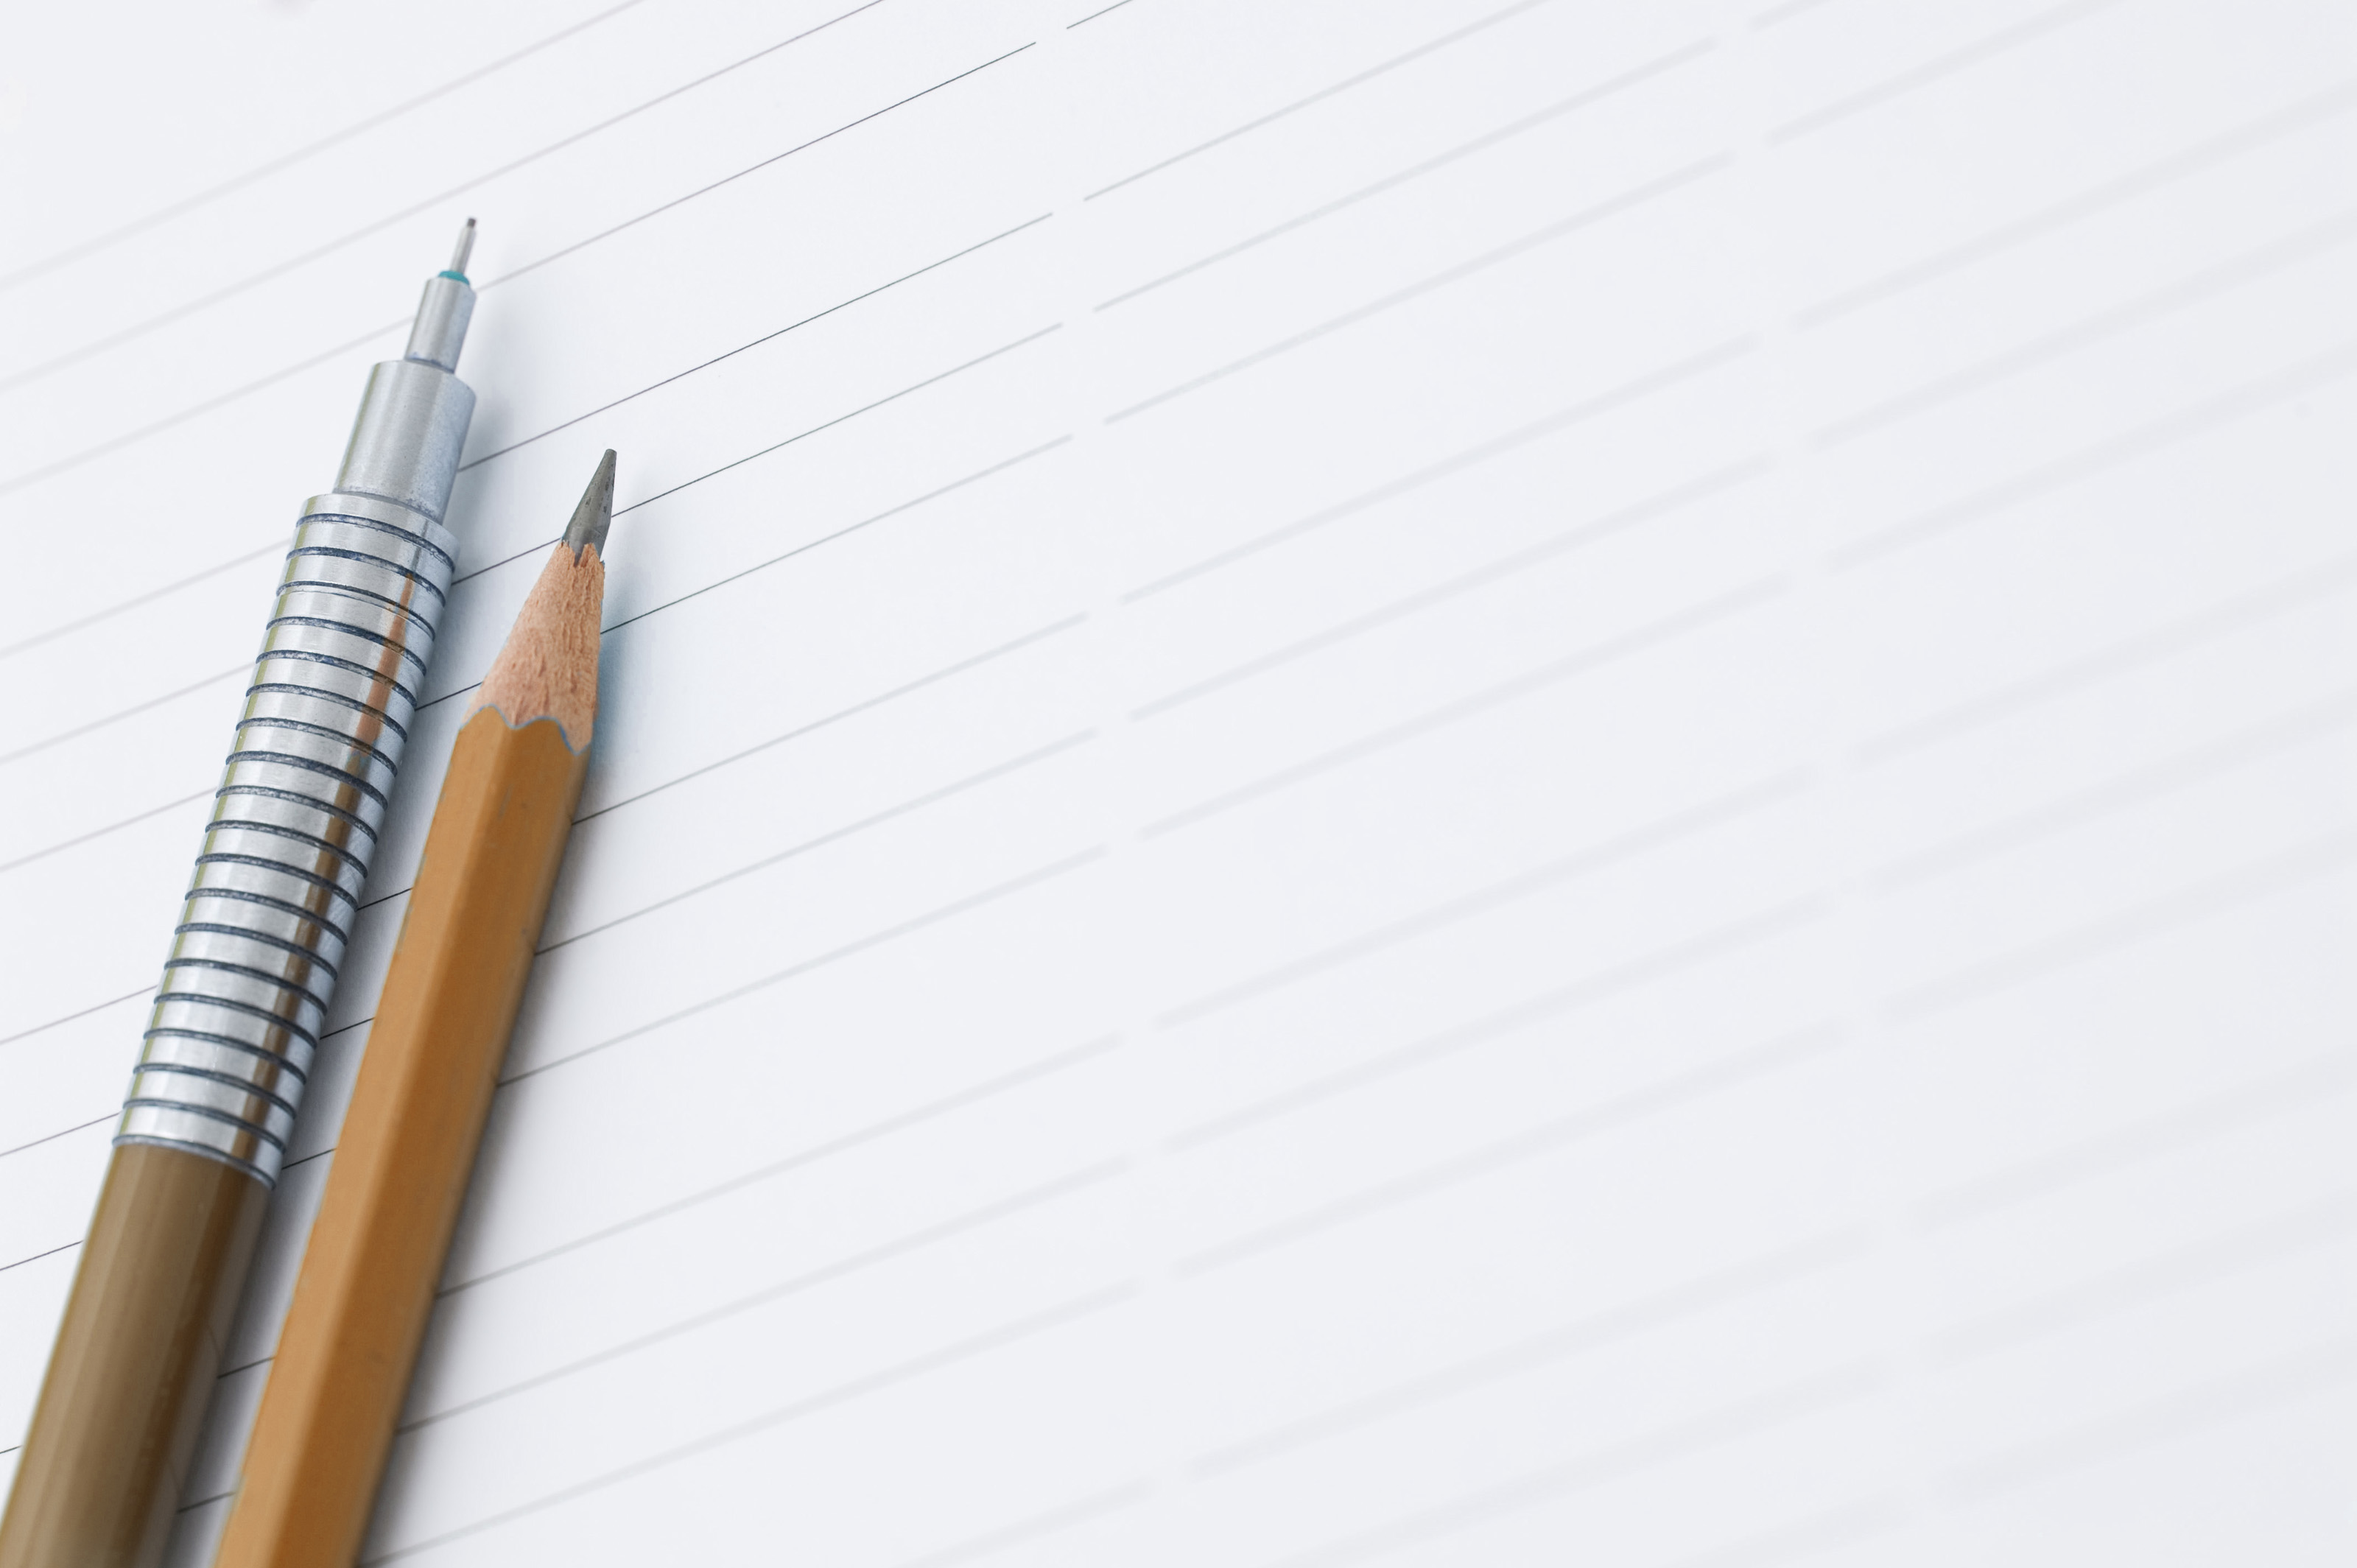 Free Stock Photo 5366 Two pencils on a sheet of paper | freeimageslive